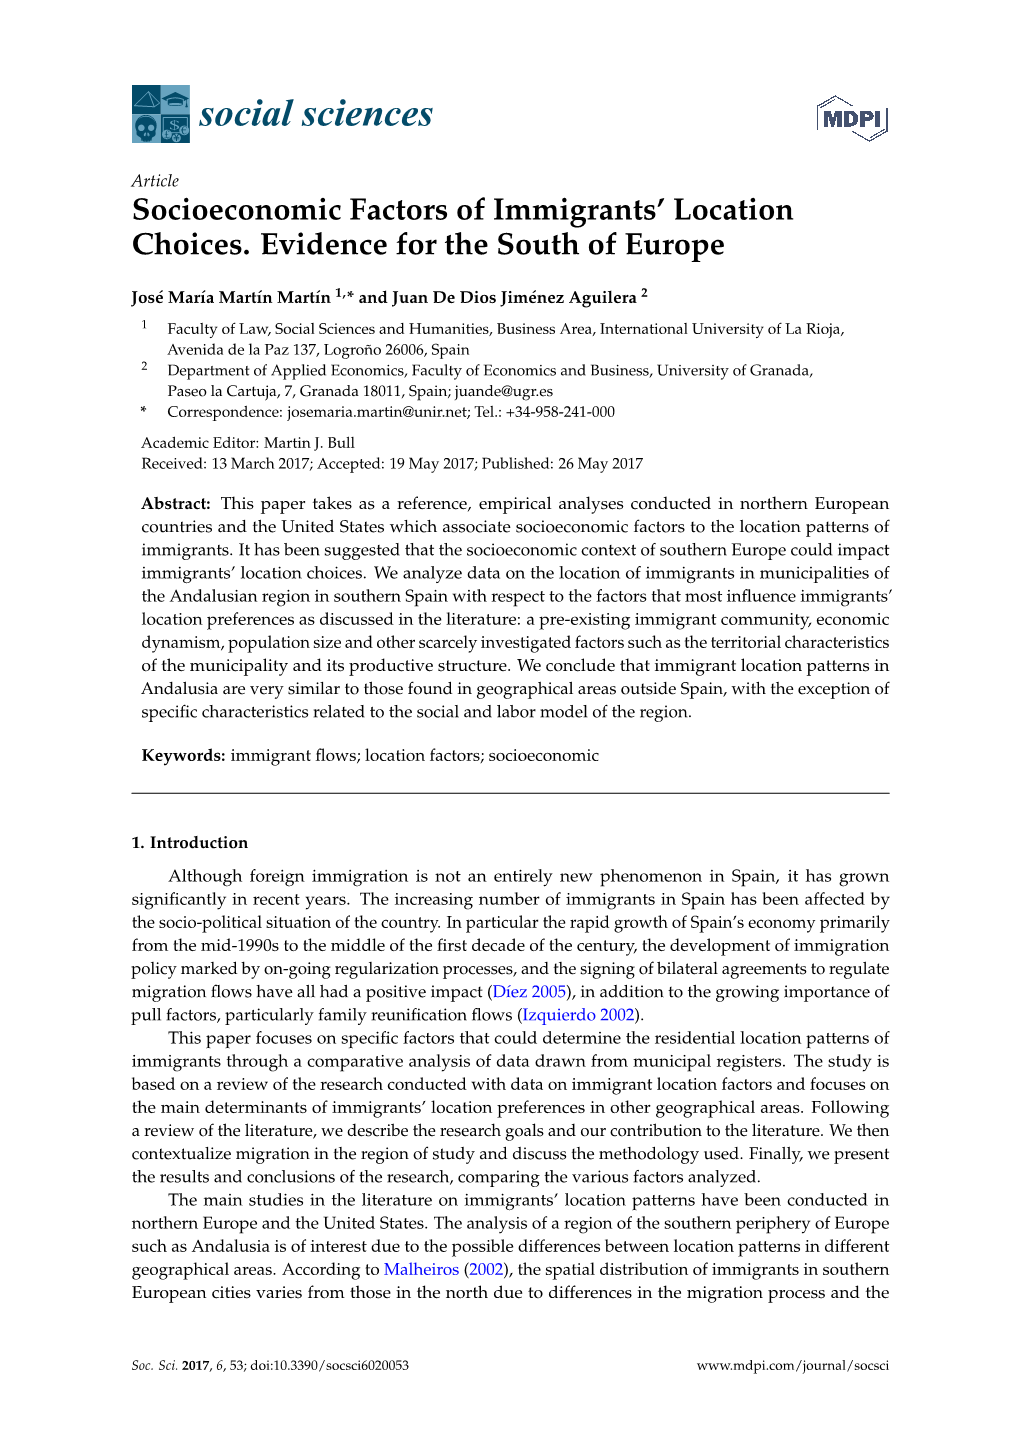 Socioeconomic Factors of Immigrants' Location Choices. Evidence for The